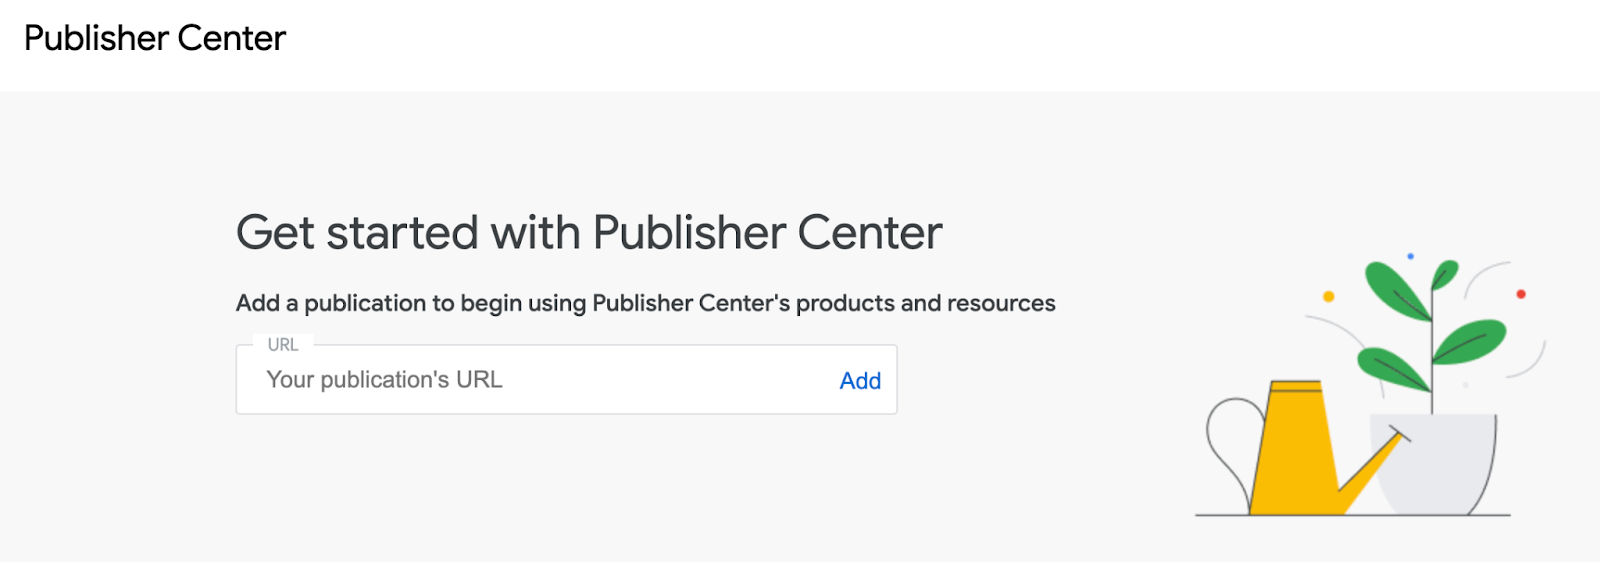 "Get started with Publisher Center" page